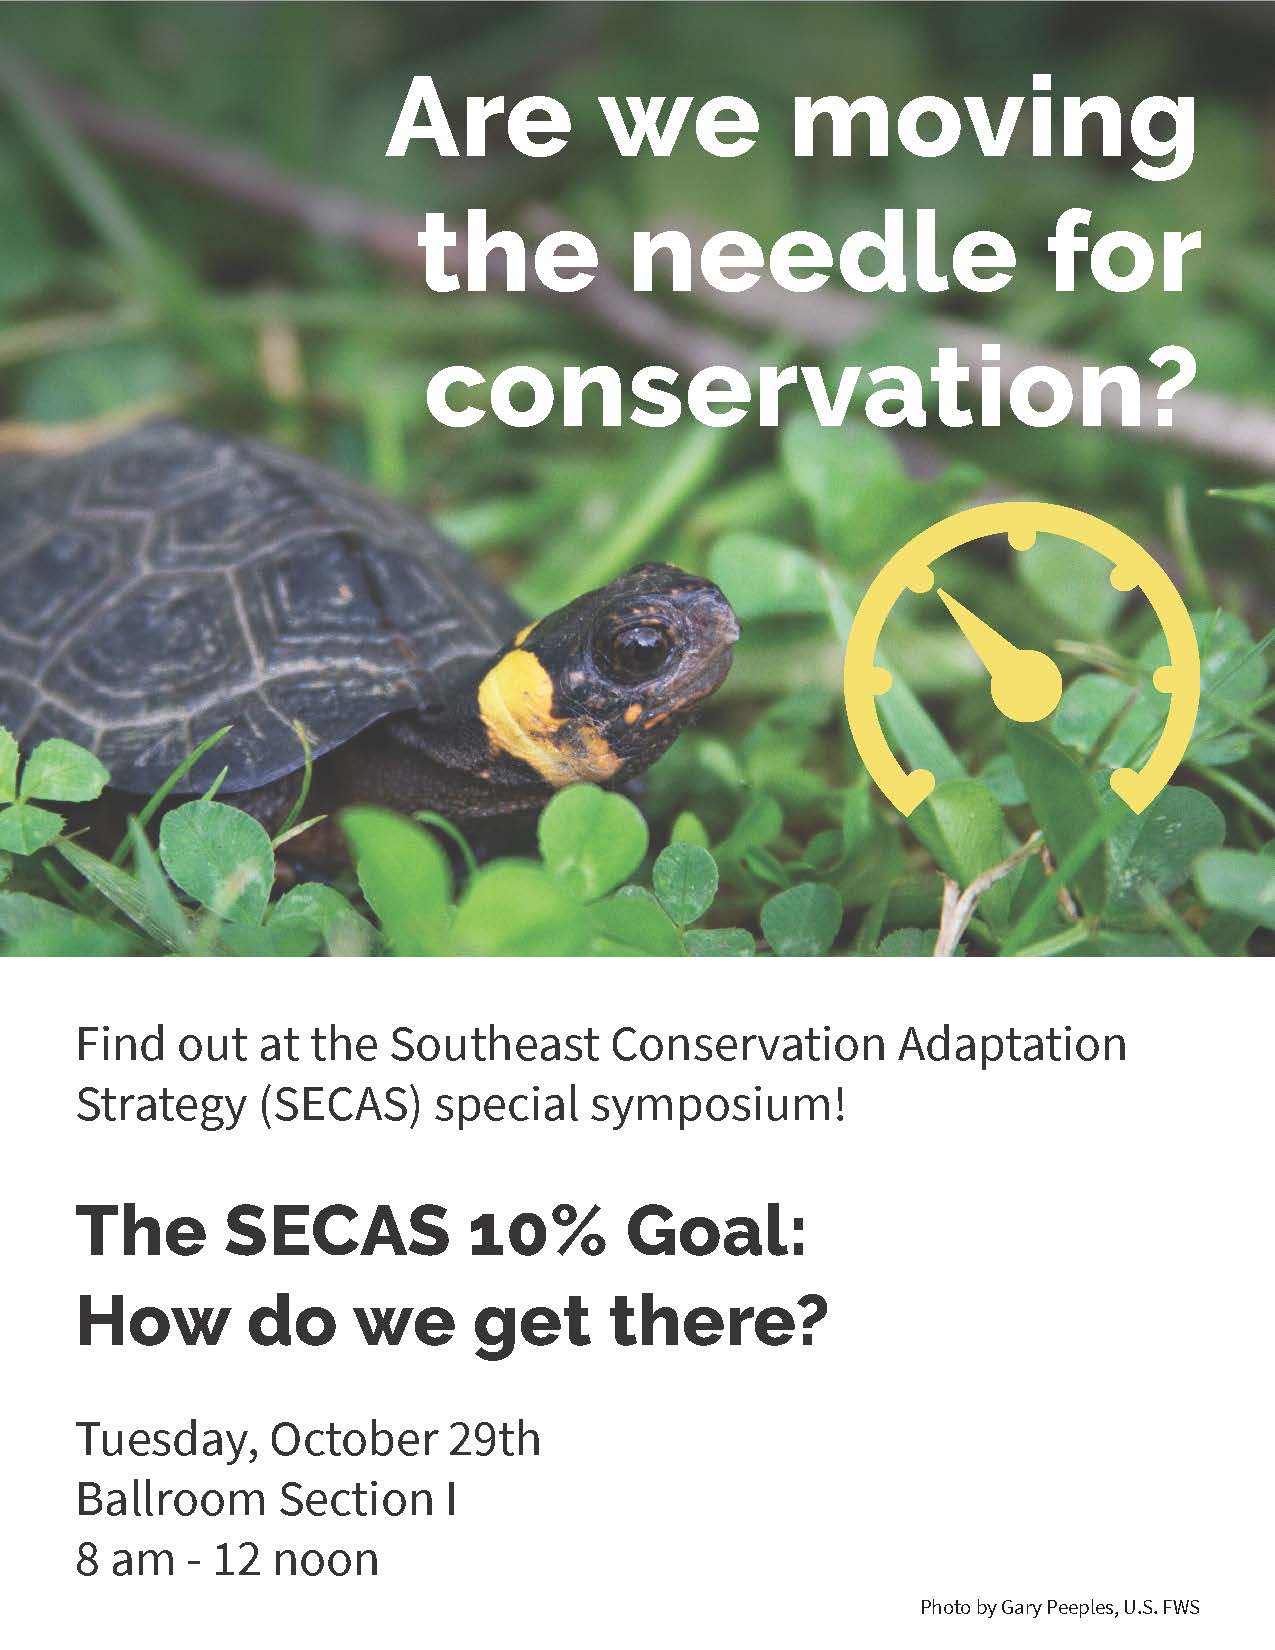 Flyer for SECAS symposium at 2019 SEAFWA annual meeting.